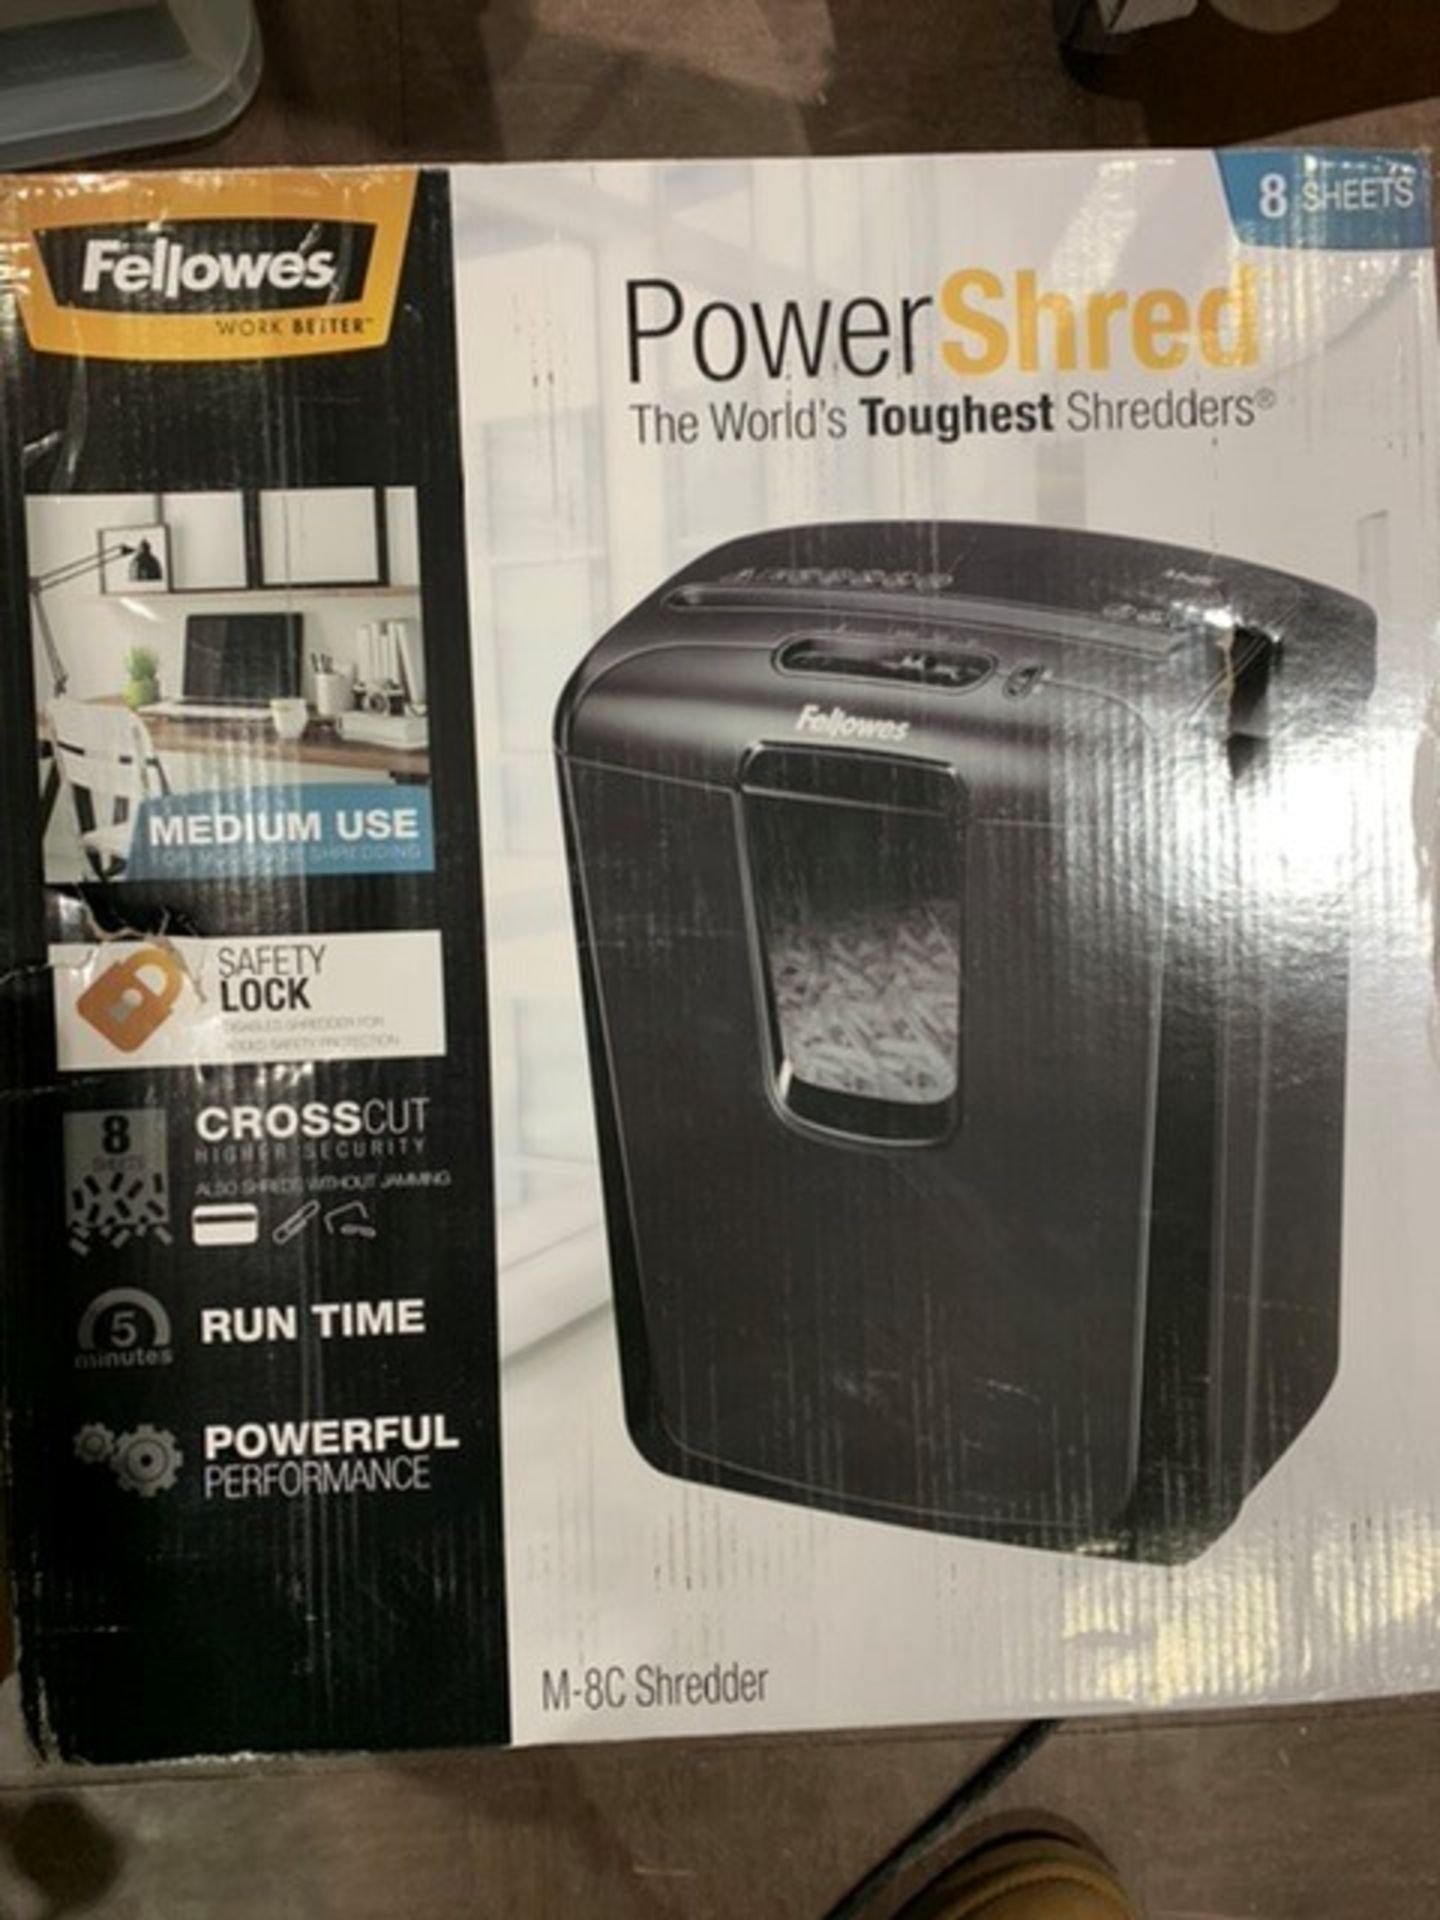 Fellowes Powershred M-8C 8 Sheet Cross Cut Personal Shredder With Safety Lock, Black - Image 2 of 2